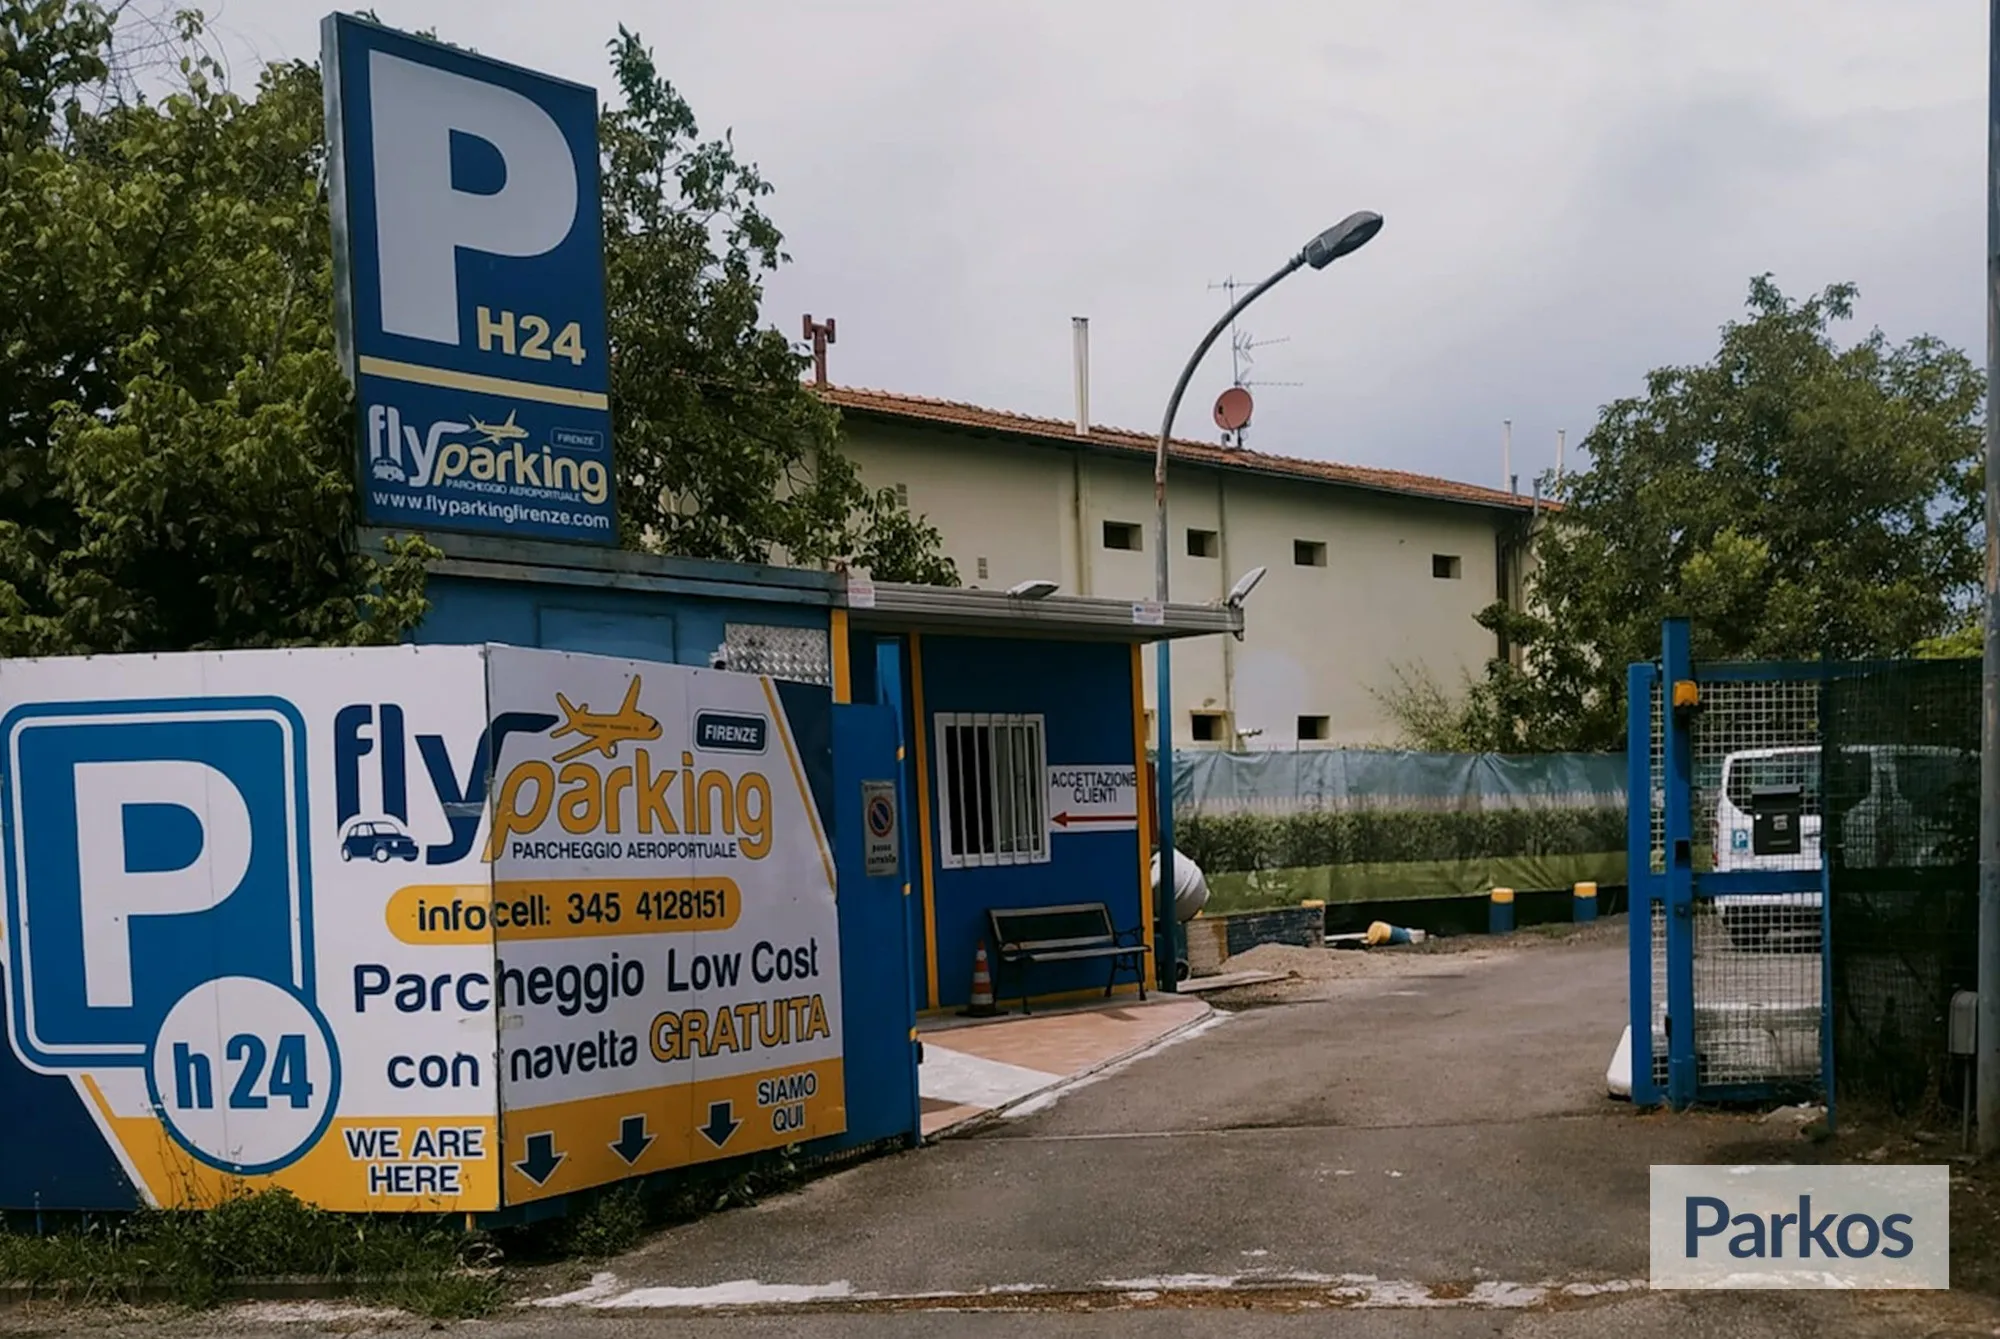 Car & Fly Parking Firenze (Paga in parcheggio) - Florence Airport Parking - picture 1